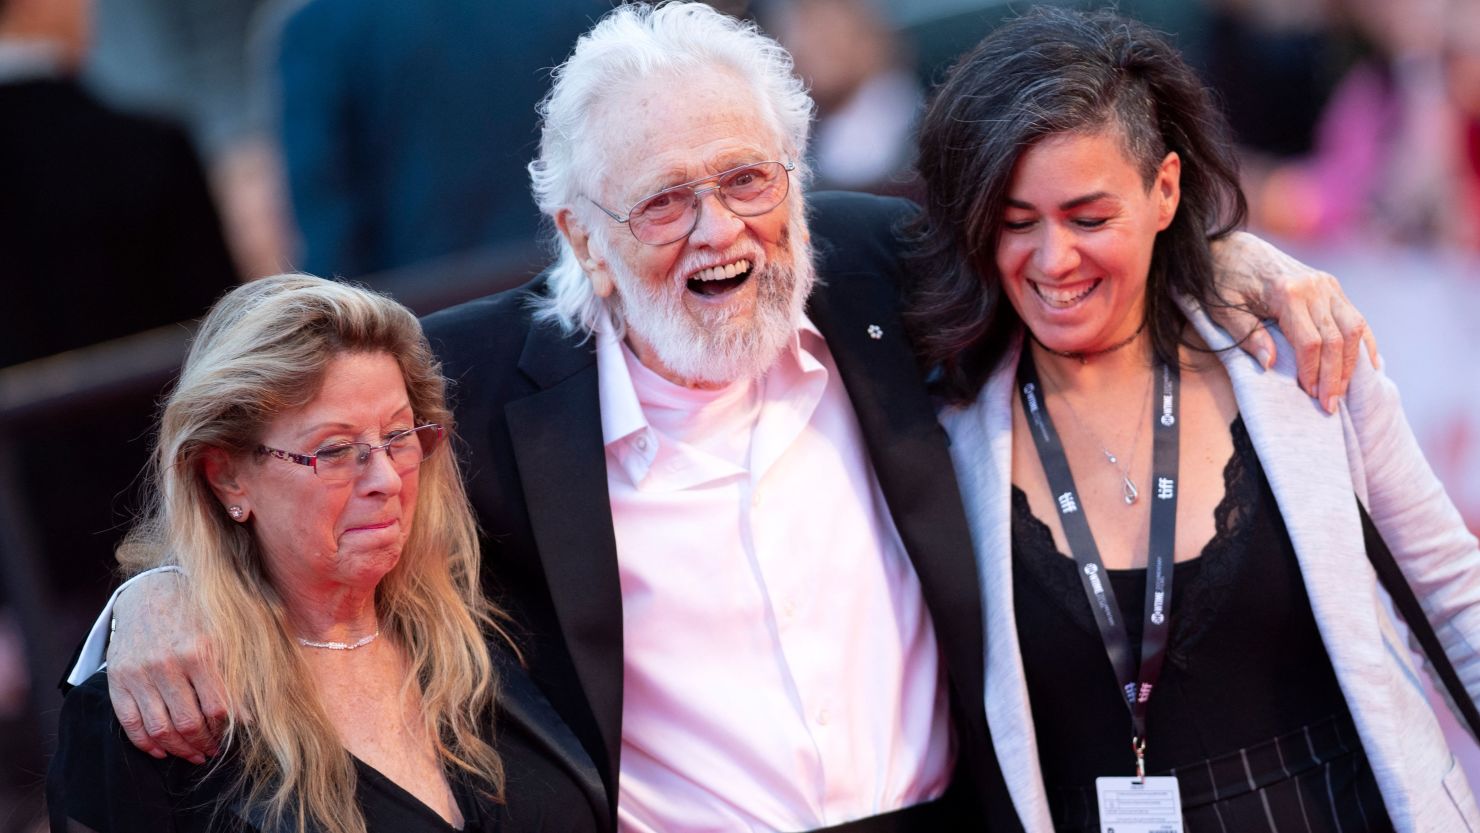 Wanda Hawkins, musician Ronnie Hawkins and guest arrive for the Opening Night Gala presentation of "Once Were Brothers: Robbie Robertson and The Band" during the Toronto International Film Festival, on September 5, 2019, in Toronto, Ontario, Canada.